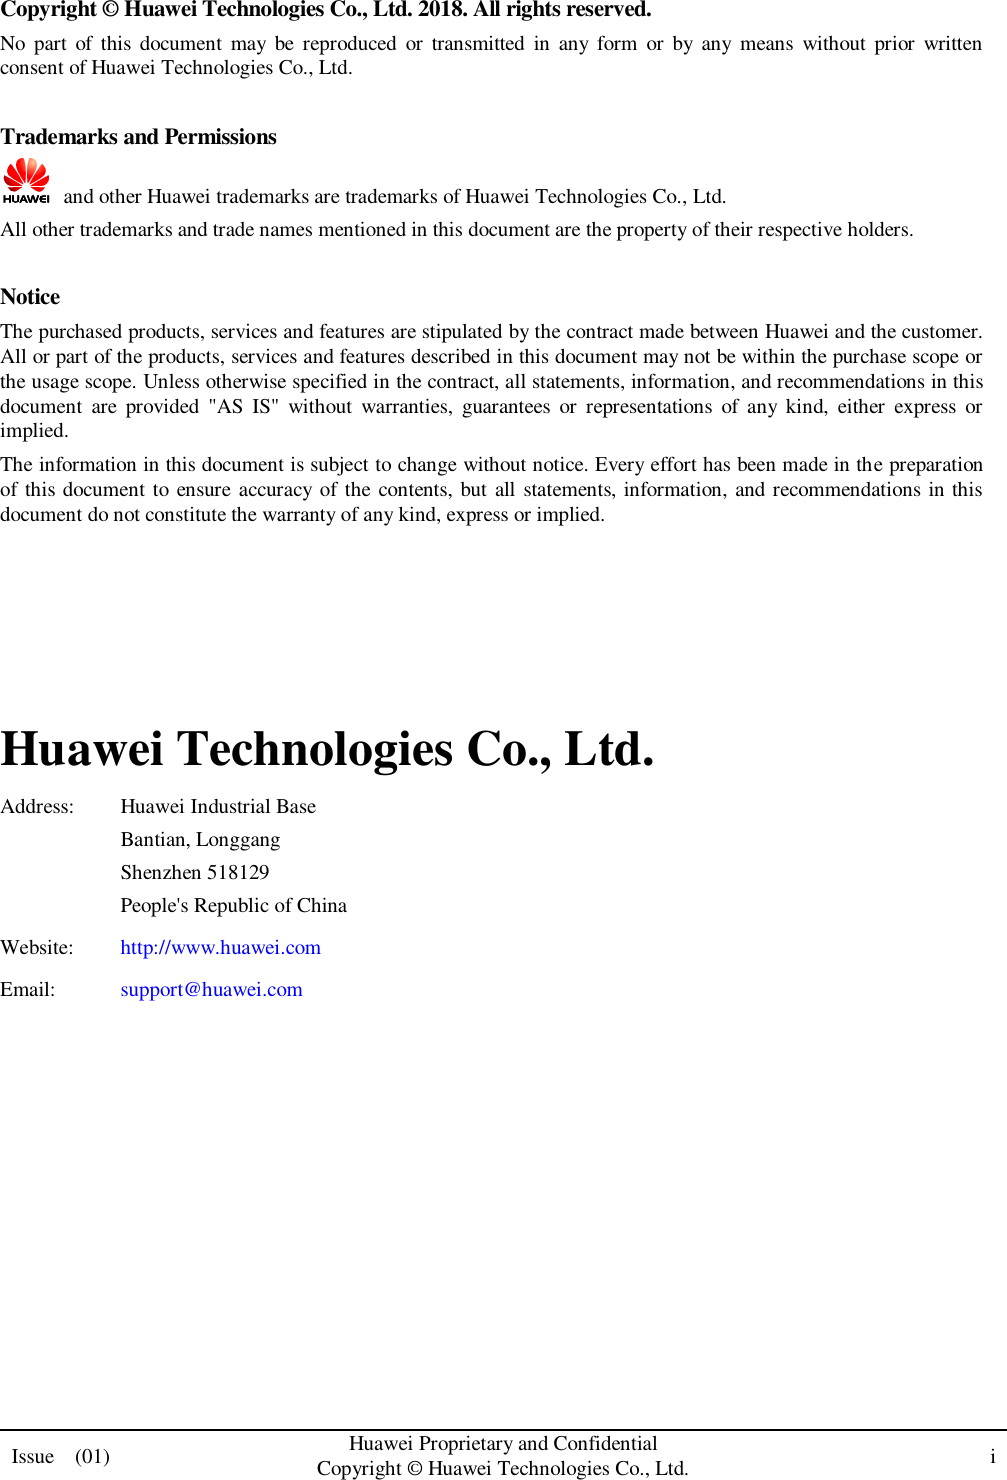  Issue    (01) Huawei Proprietary and Confidential                                     Copyright © Huawei Technologies Co., Ltd. i    Copyright © Huawei Technologies Co., Ltd. 2018. All rights reserved. No  part  of  this  document  may  be  reproduced  or  transmitted  in  any  form  or  by  any  means  without  prior  written consent of Huawei Technologies Co., Ltd.  Trademarks and Permissions   and other Huawei trademarks are trademarks of Huawei Technologies Co., Ltd. All other trademarks and trade names mentioned in this document are the property of their respective holders.  Notice The purchased products, services and features are stipulated by the contract made between Huawei and the customer. All or part of the products, services and features described in this document may not be within the purchase scope or the usage scope. Unless otherwise specified in the contract, all statements, information, and recommendations in this document  are  provided  &quot;AS  IS&quot;  without  warranties,  guarantees  or  representations  of  any  kind,  either  express  or implied. The information in this document is subject to change without notice. Every effort has been made in the preparation of this document to ensure accuracy of the contents, but all statements, information, and recommendations in this document do not constitute the warranty of any kind, express or implied.     Huawei Technologies Co., Ltd. Address: Huawei Industrial Base Bantian, Longgang Shenzhen 518129 People&apos;s Republic of China Website: http://www.huawei.com Email: support@huawei.com          